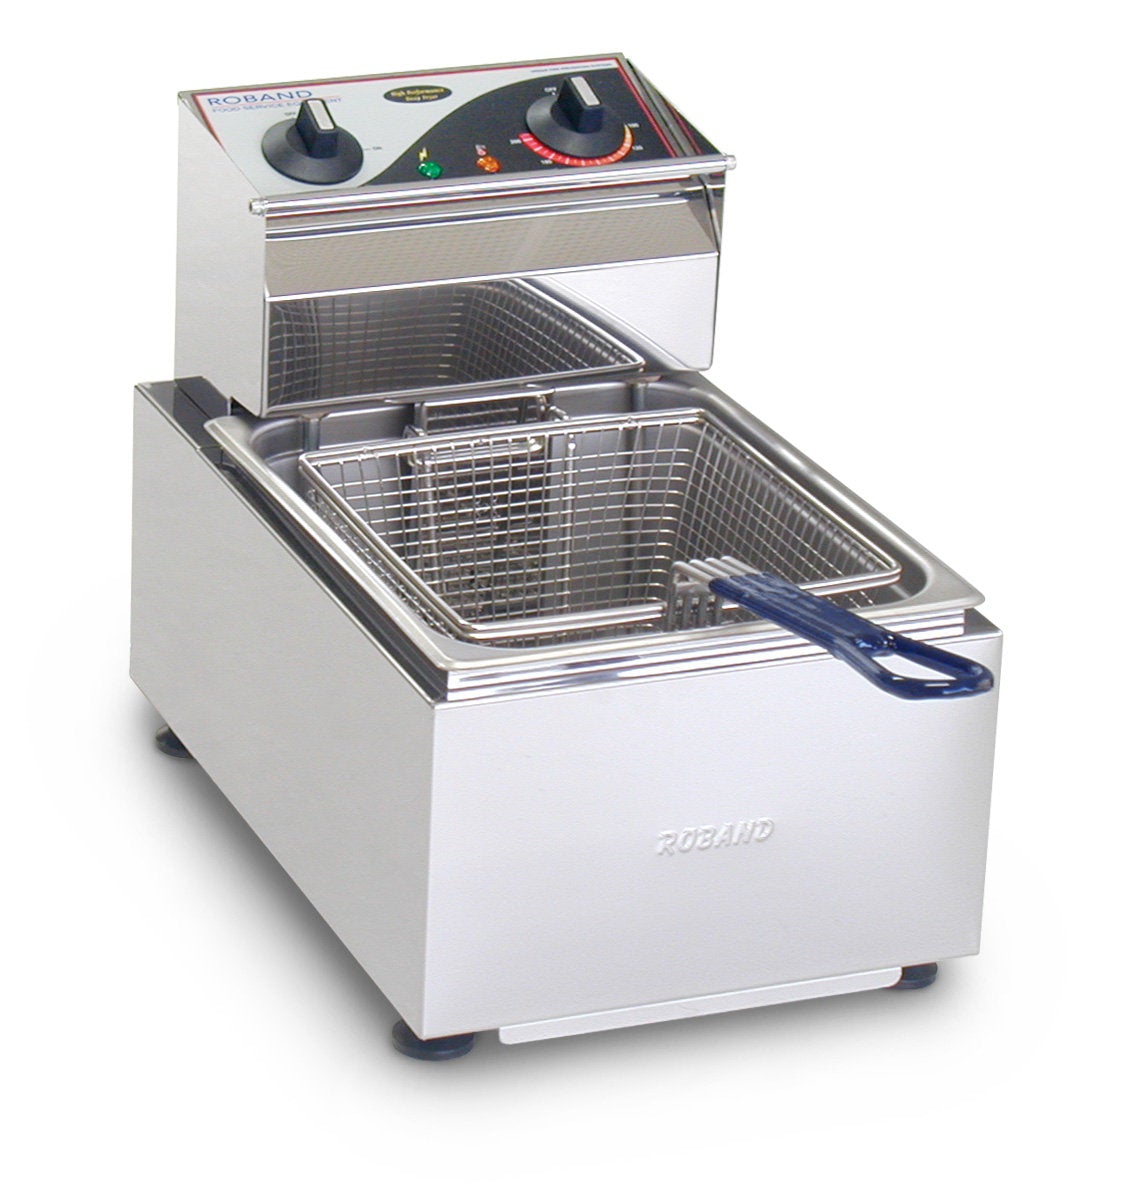 New ROBAND Counter top fryer F15